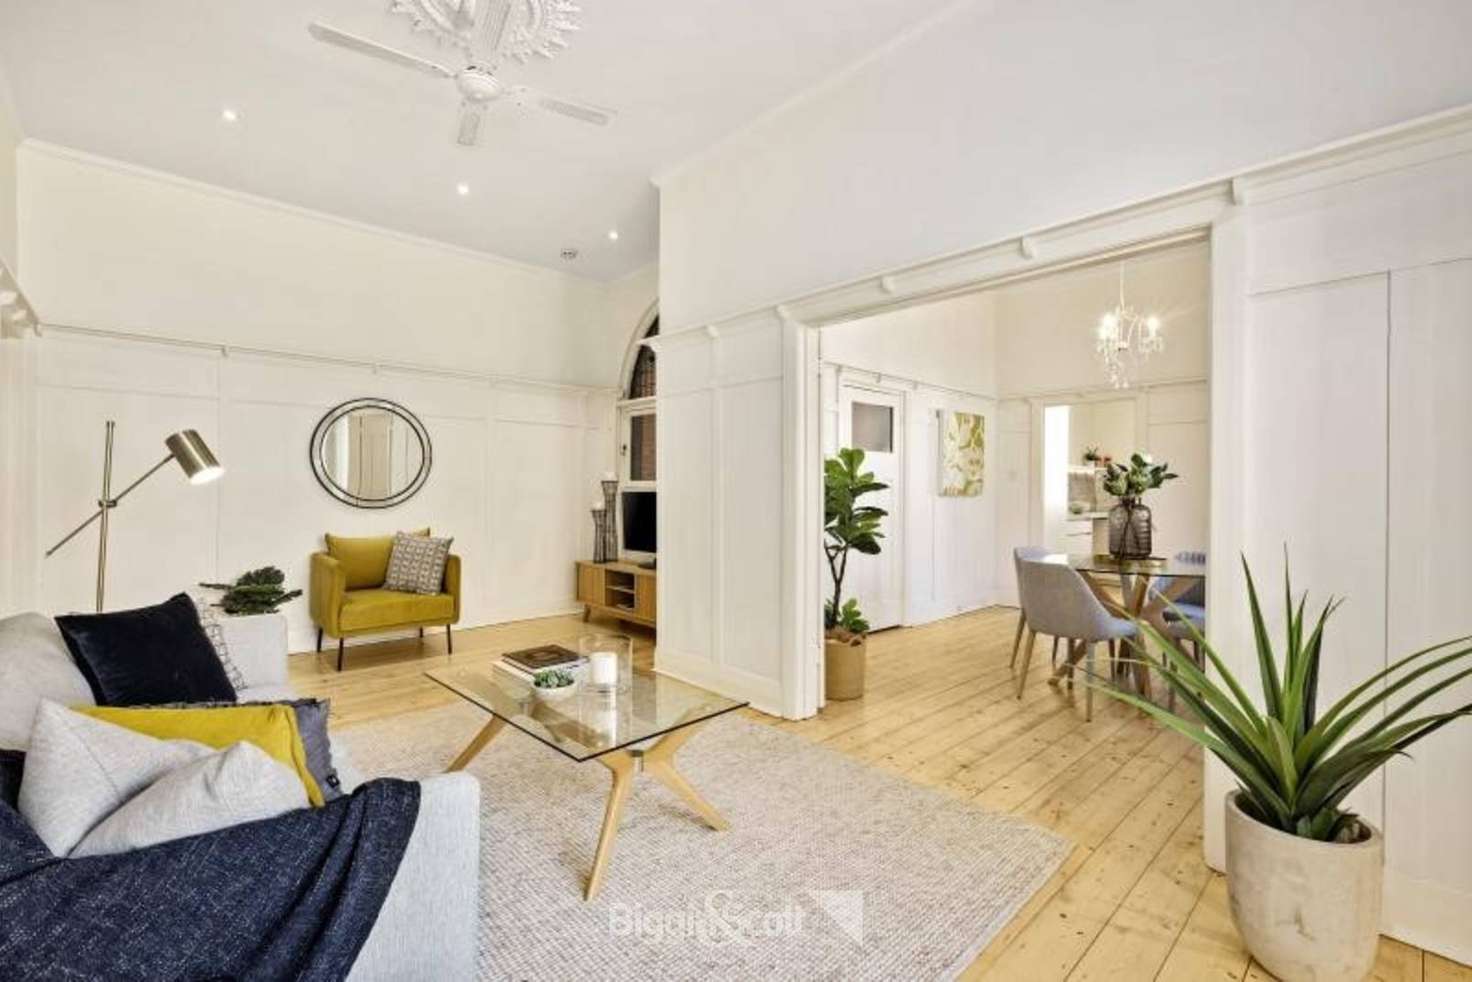 Main view of Homely apartment listing, 4/36 Grey Street, St Kilda VIC 3182